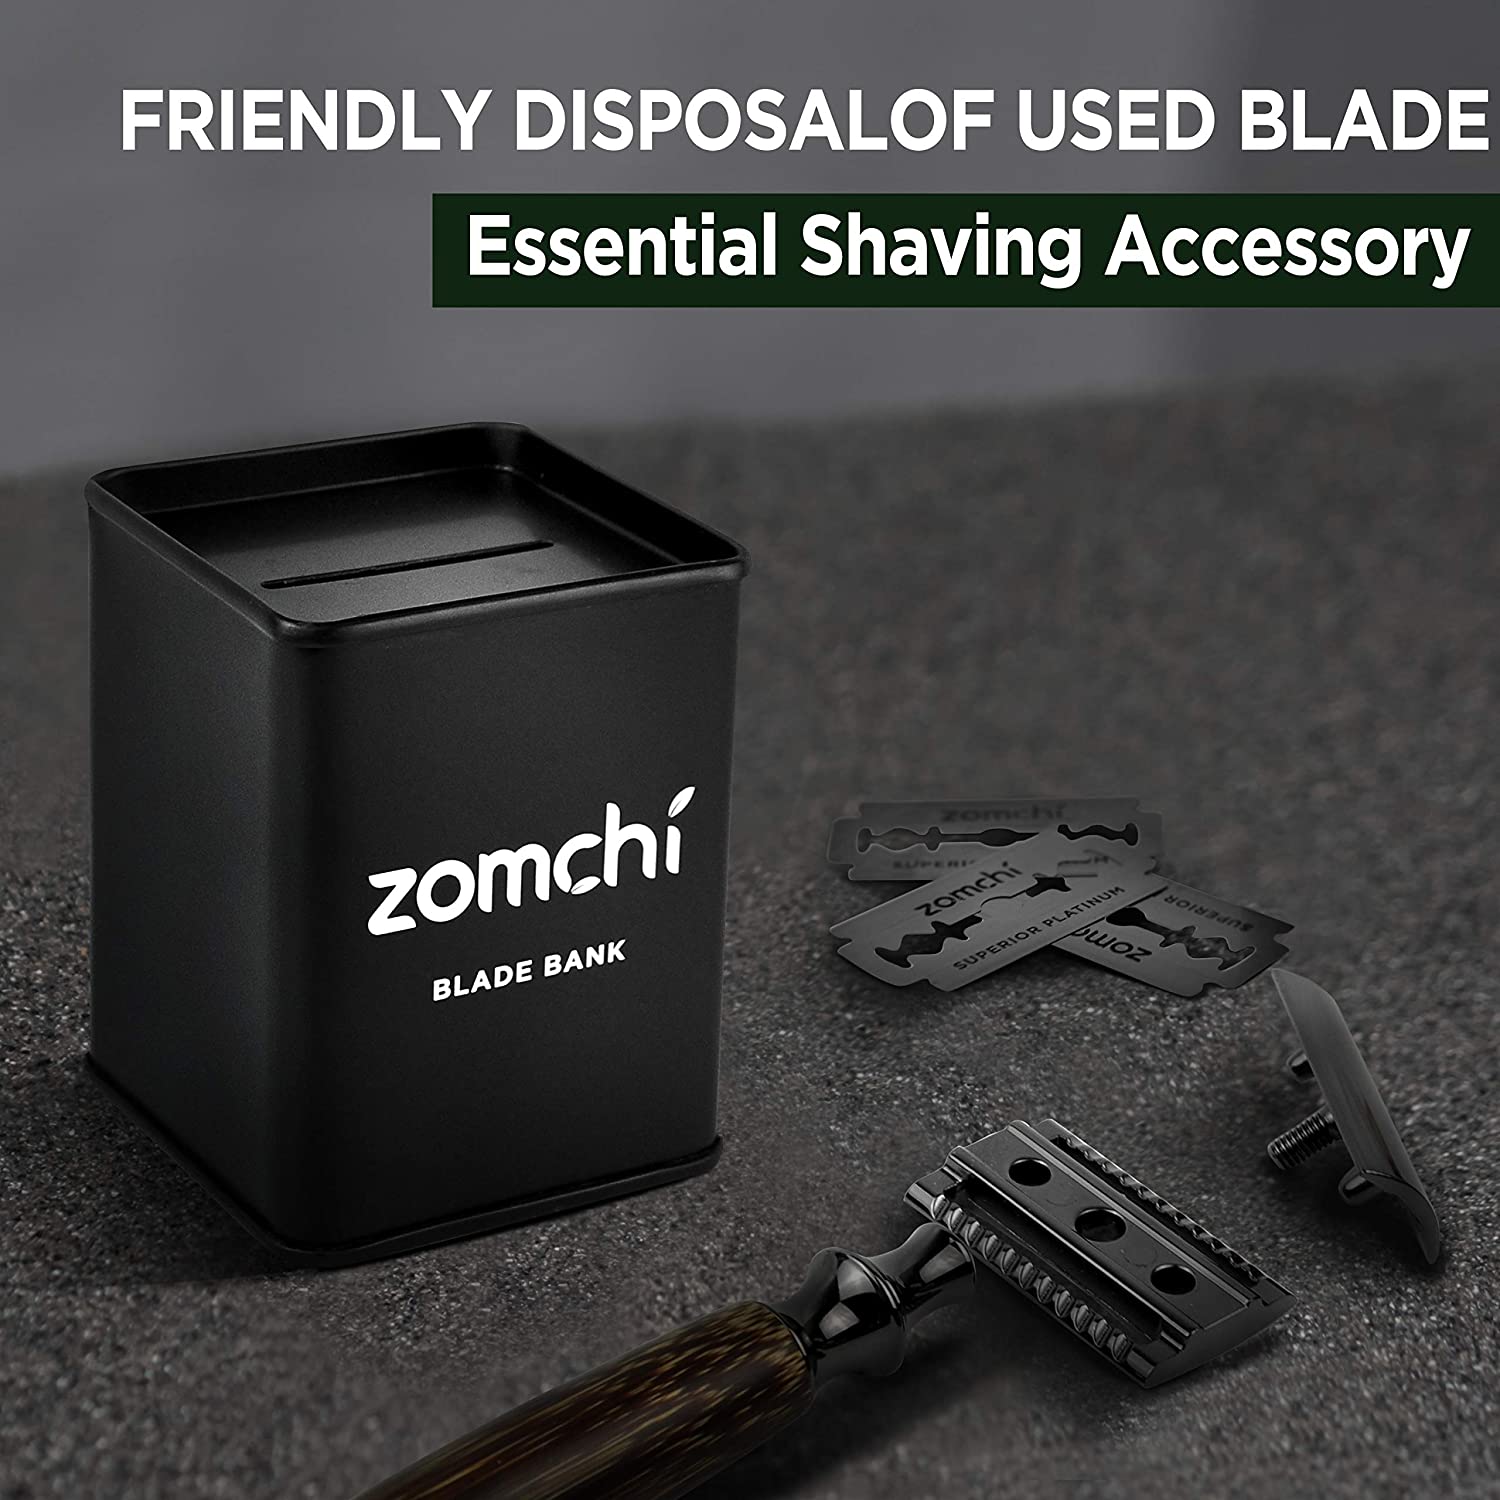 Friendly Disposal Of Used Blade With Zomchi Blades Bank